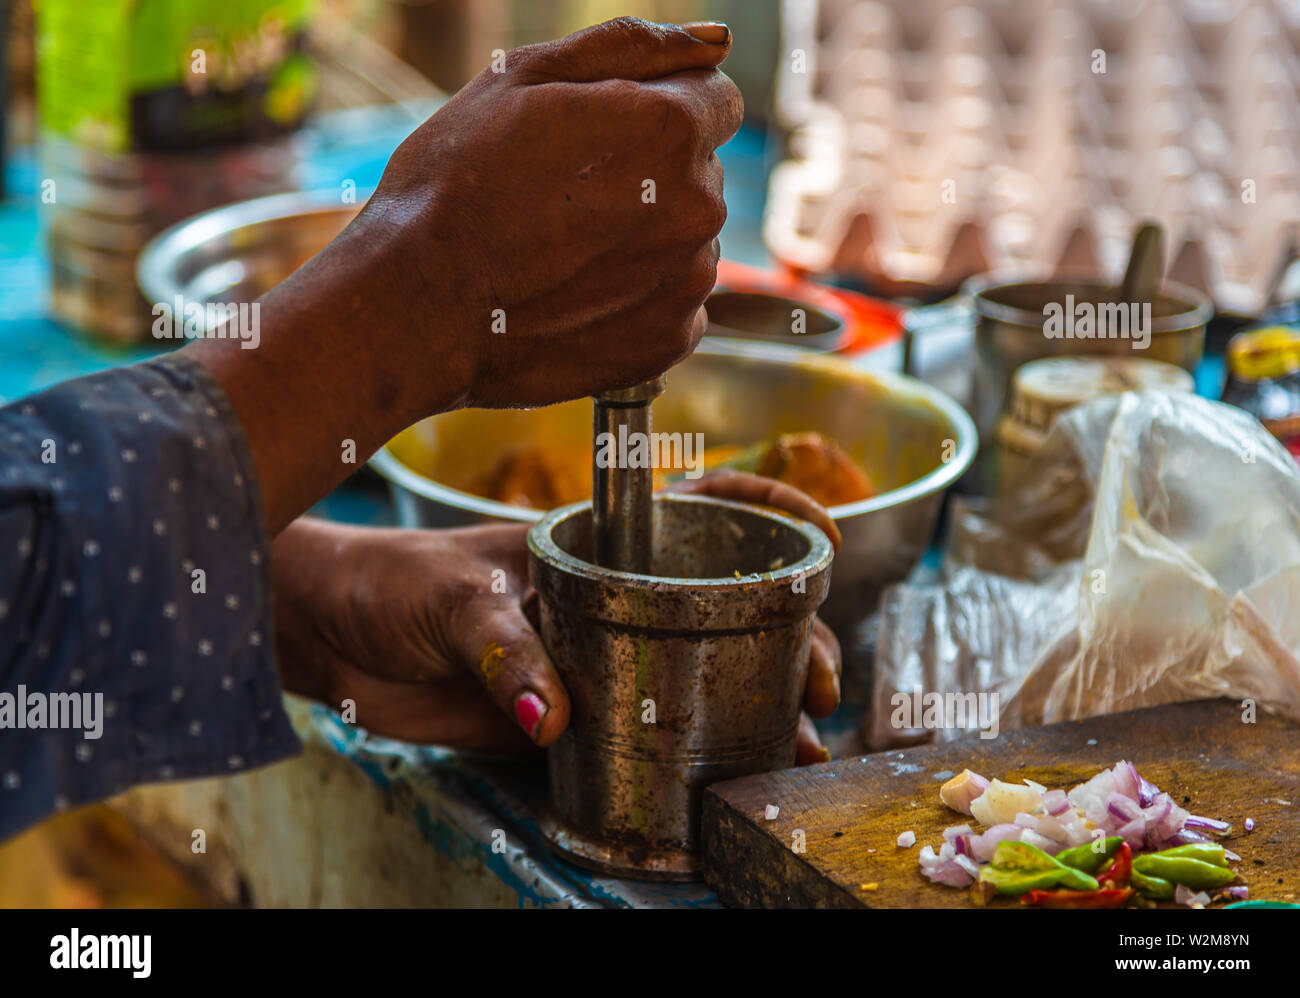 Close up of Mortar and Pestle set with a man's hand during grinding spices. Stock Photo